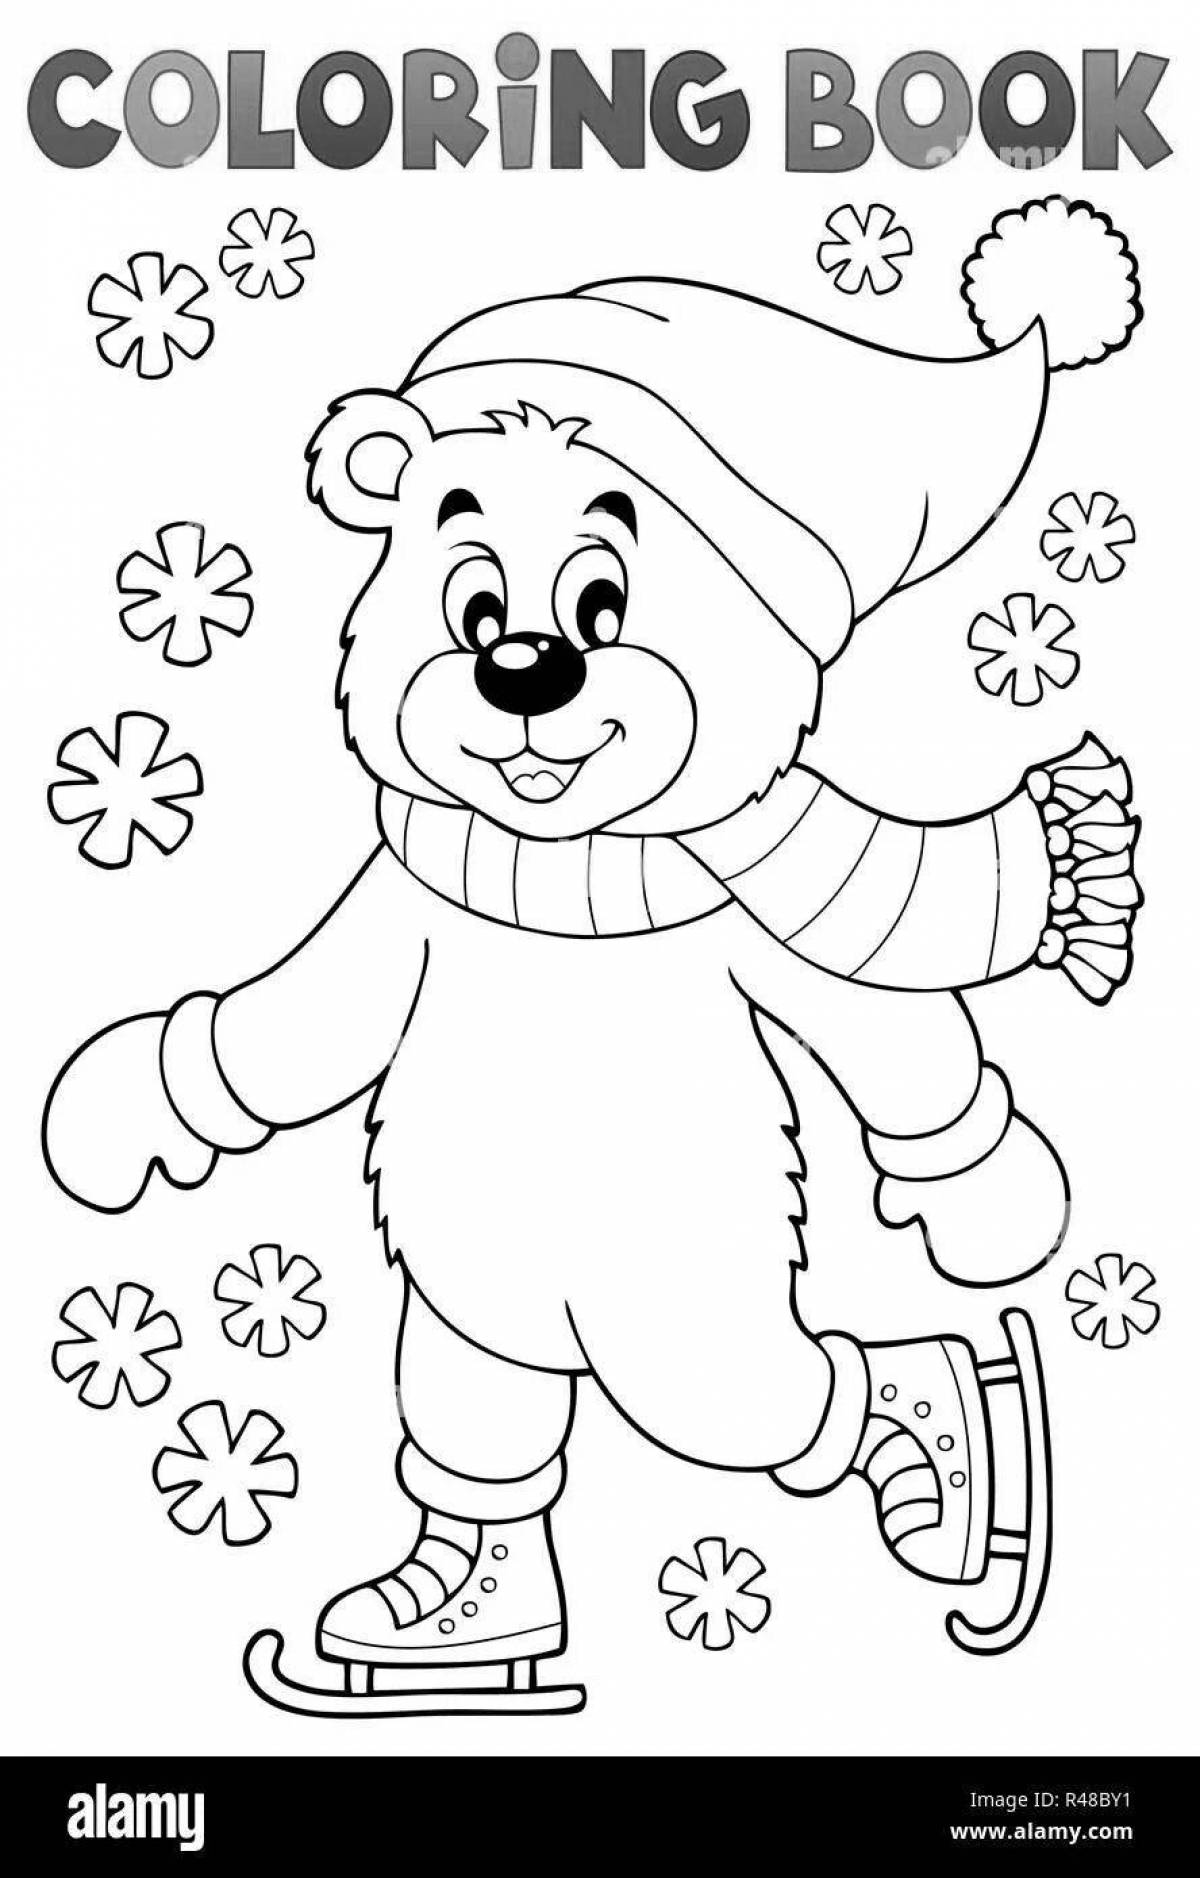 Coloring page gorgeous bear on skis